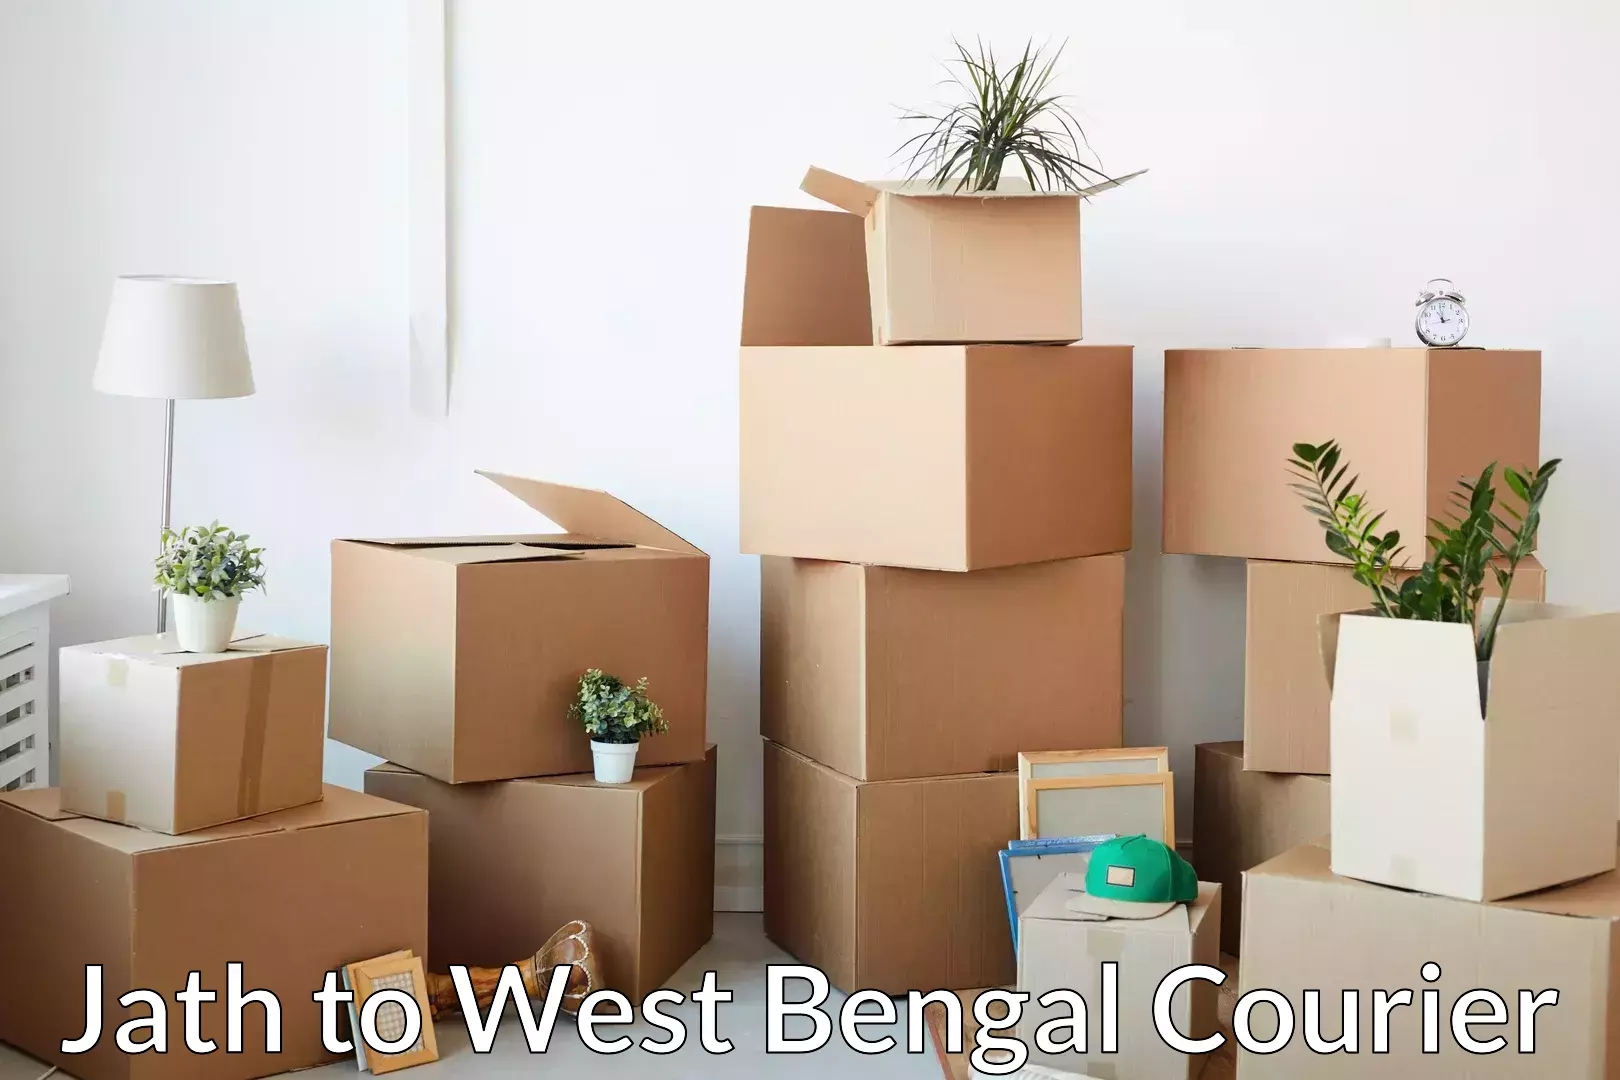 Trusted moving company Jath to West Bengal